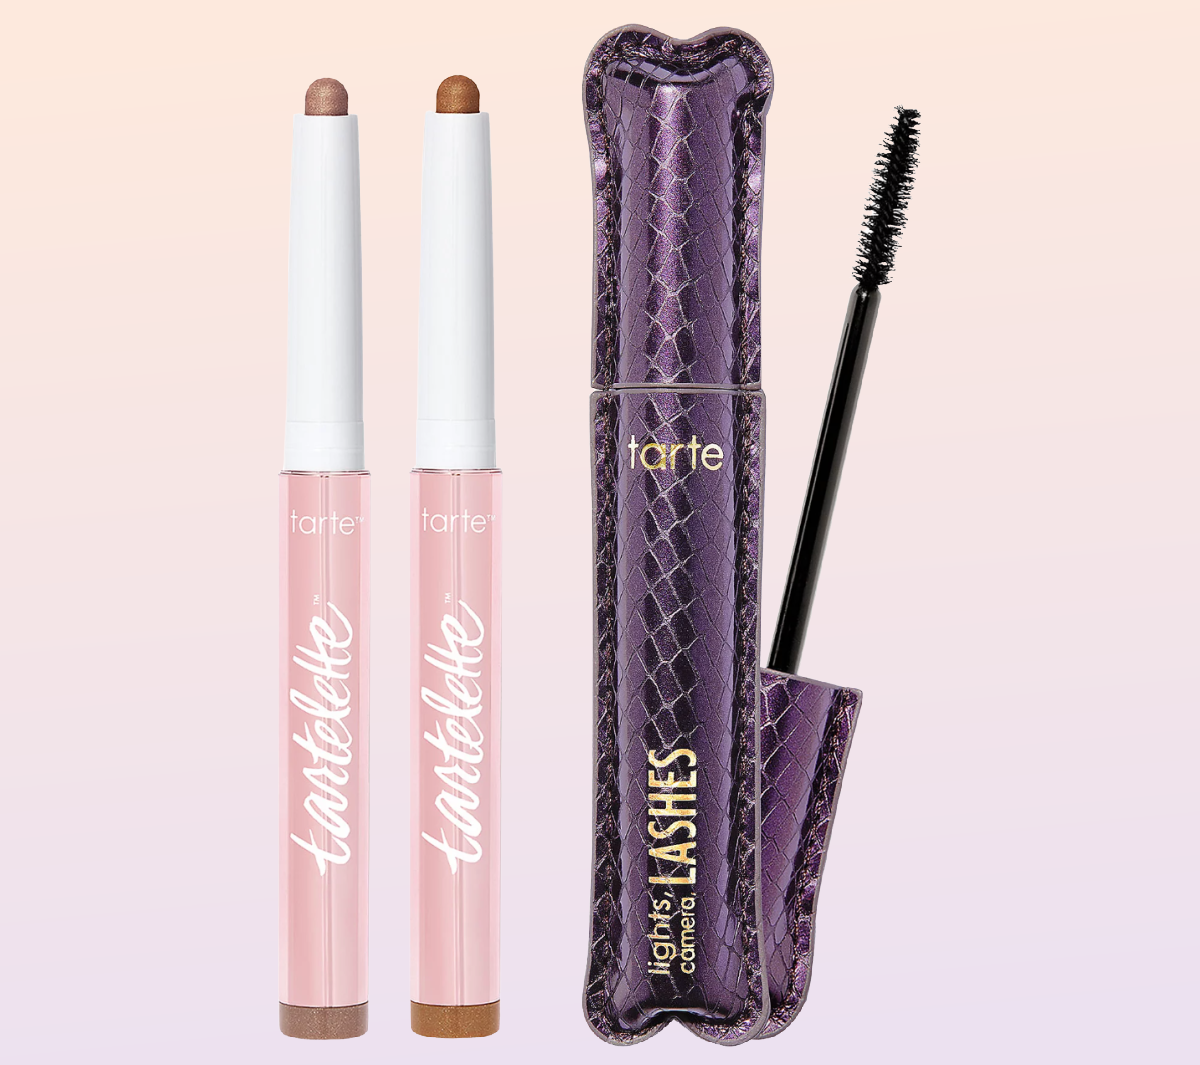 The Tarte Cosmetics Lights, Camera, Lashes Mascara and Shadow Sticks Kit that you can buy at a discount with our QVC promo code for July 2023